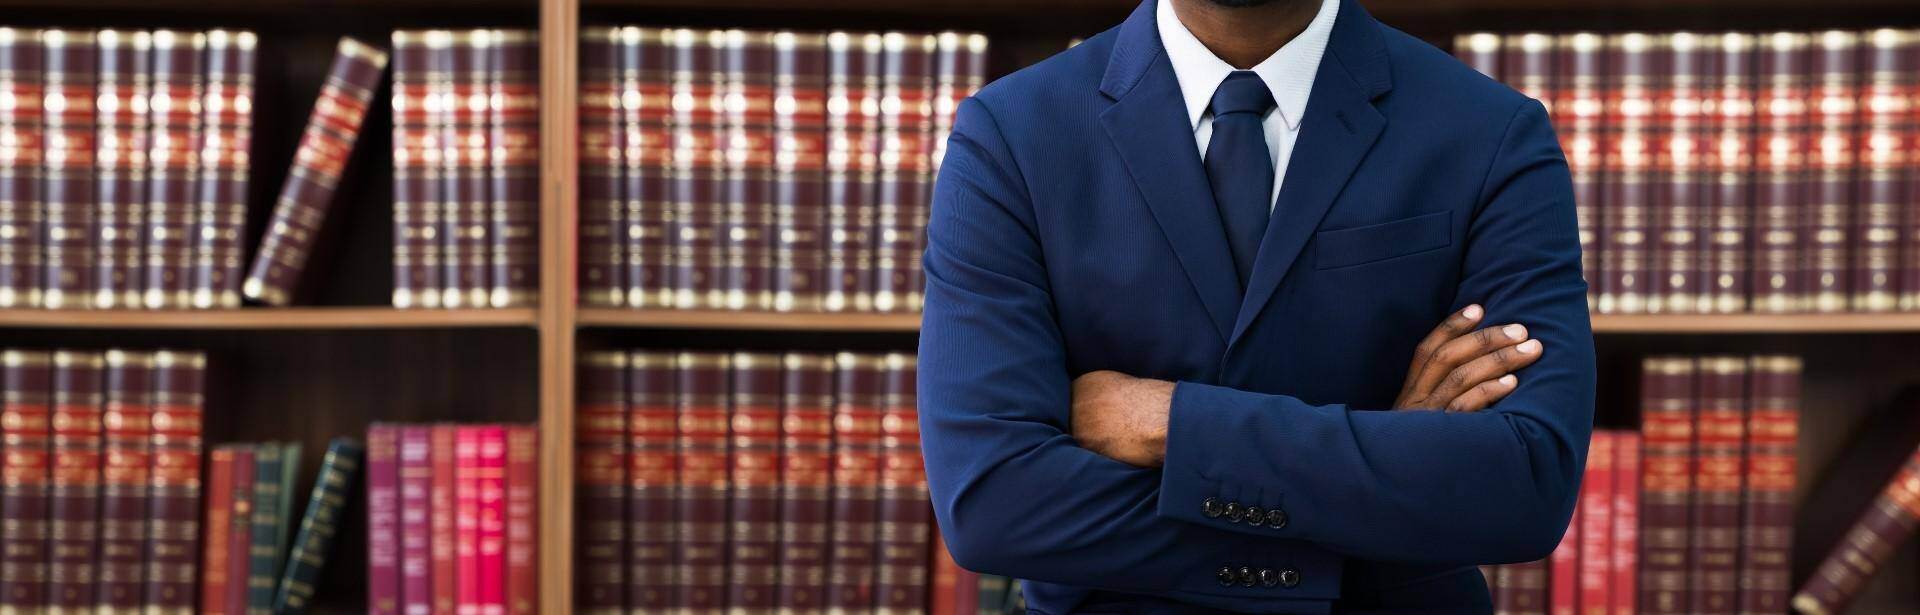 A black lawyer standing in front of a bookshelf of law book in Evans, Georgia